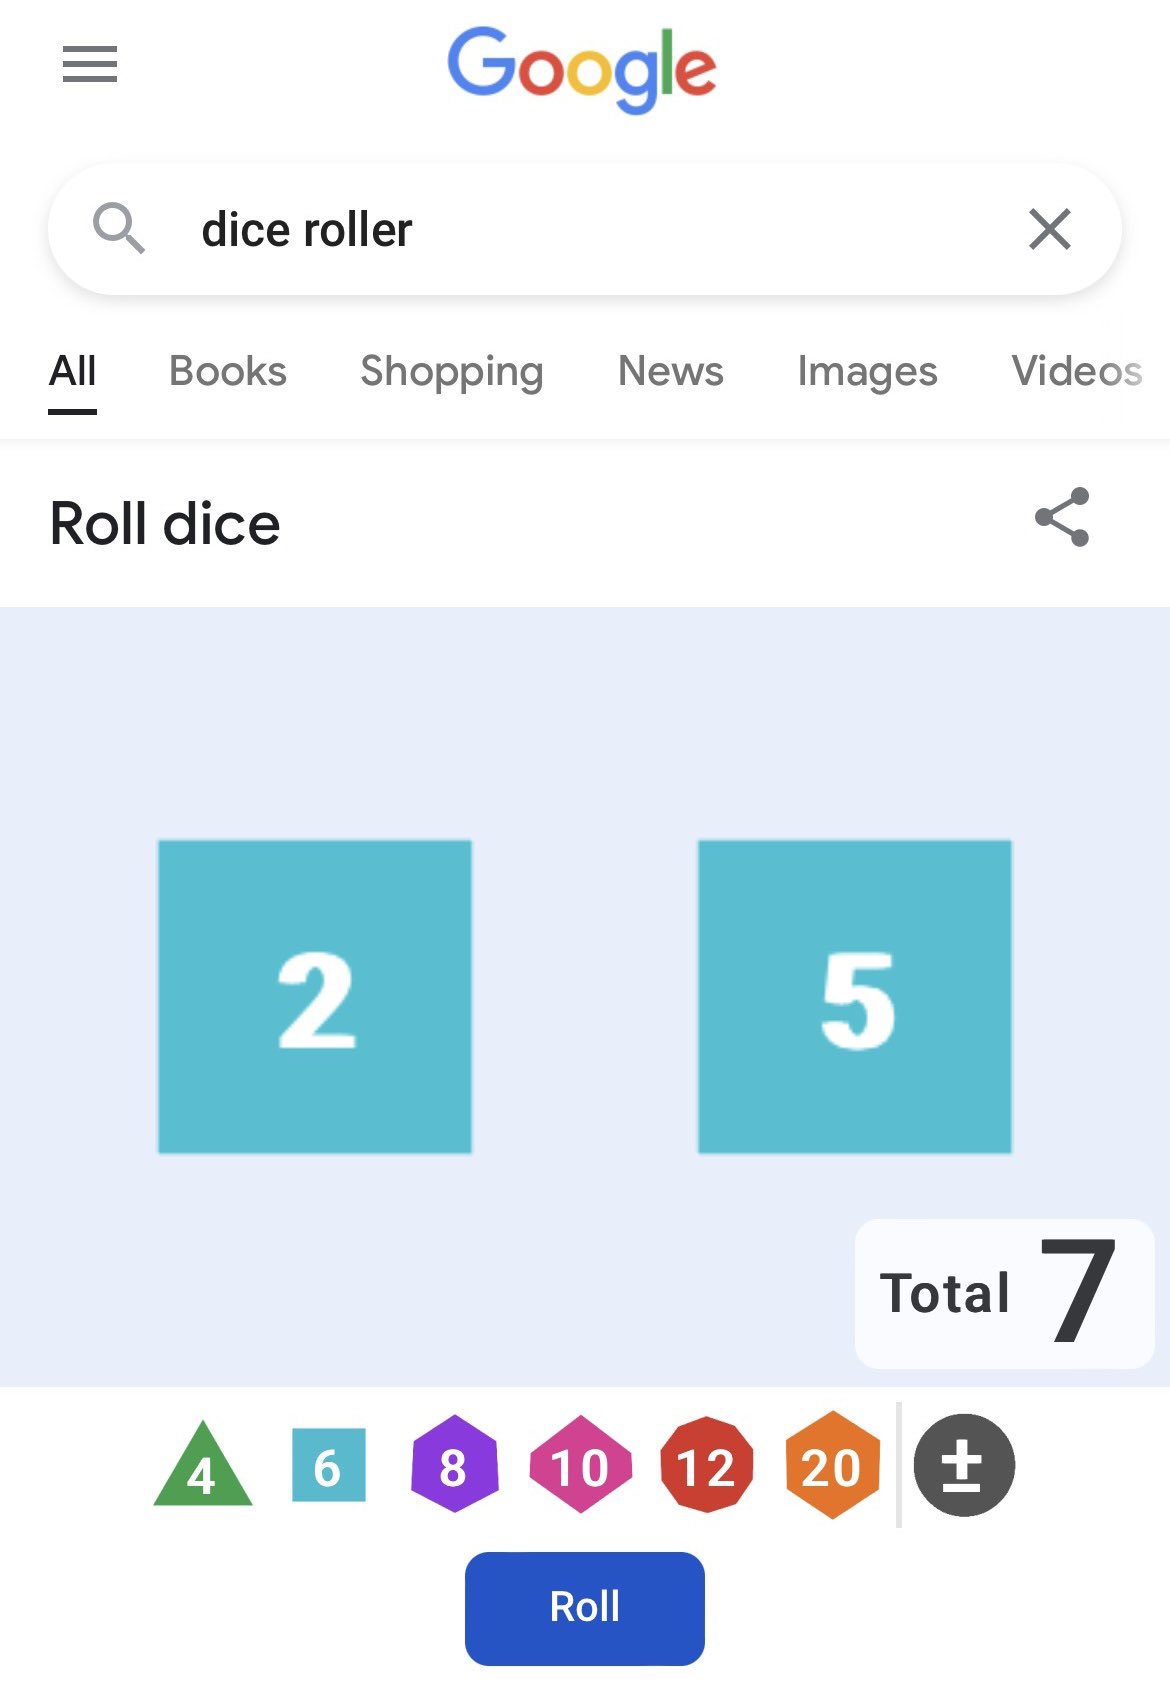 Alice Keeler on X: How to Roll 3 Dice in Google - dice roller    / X